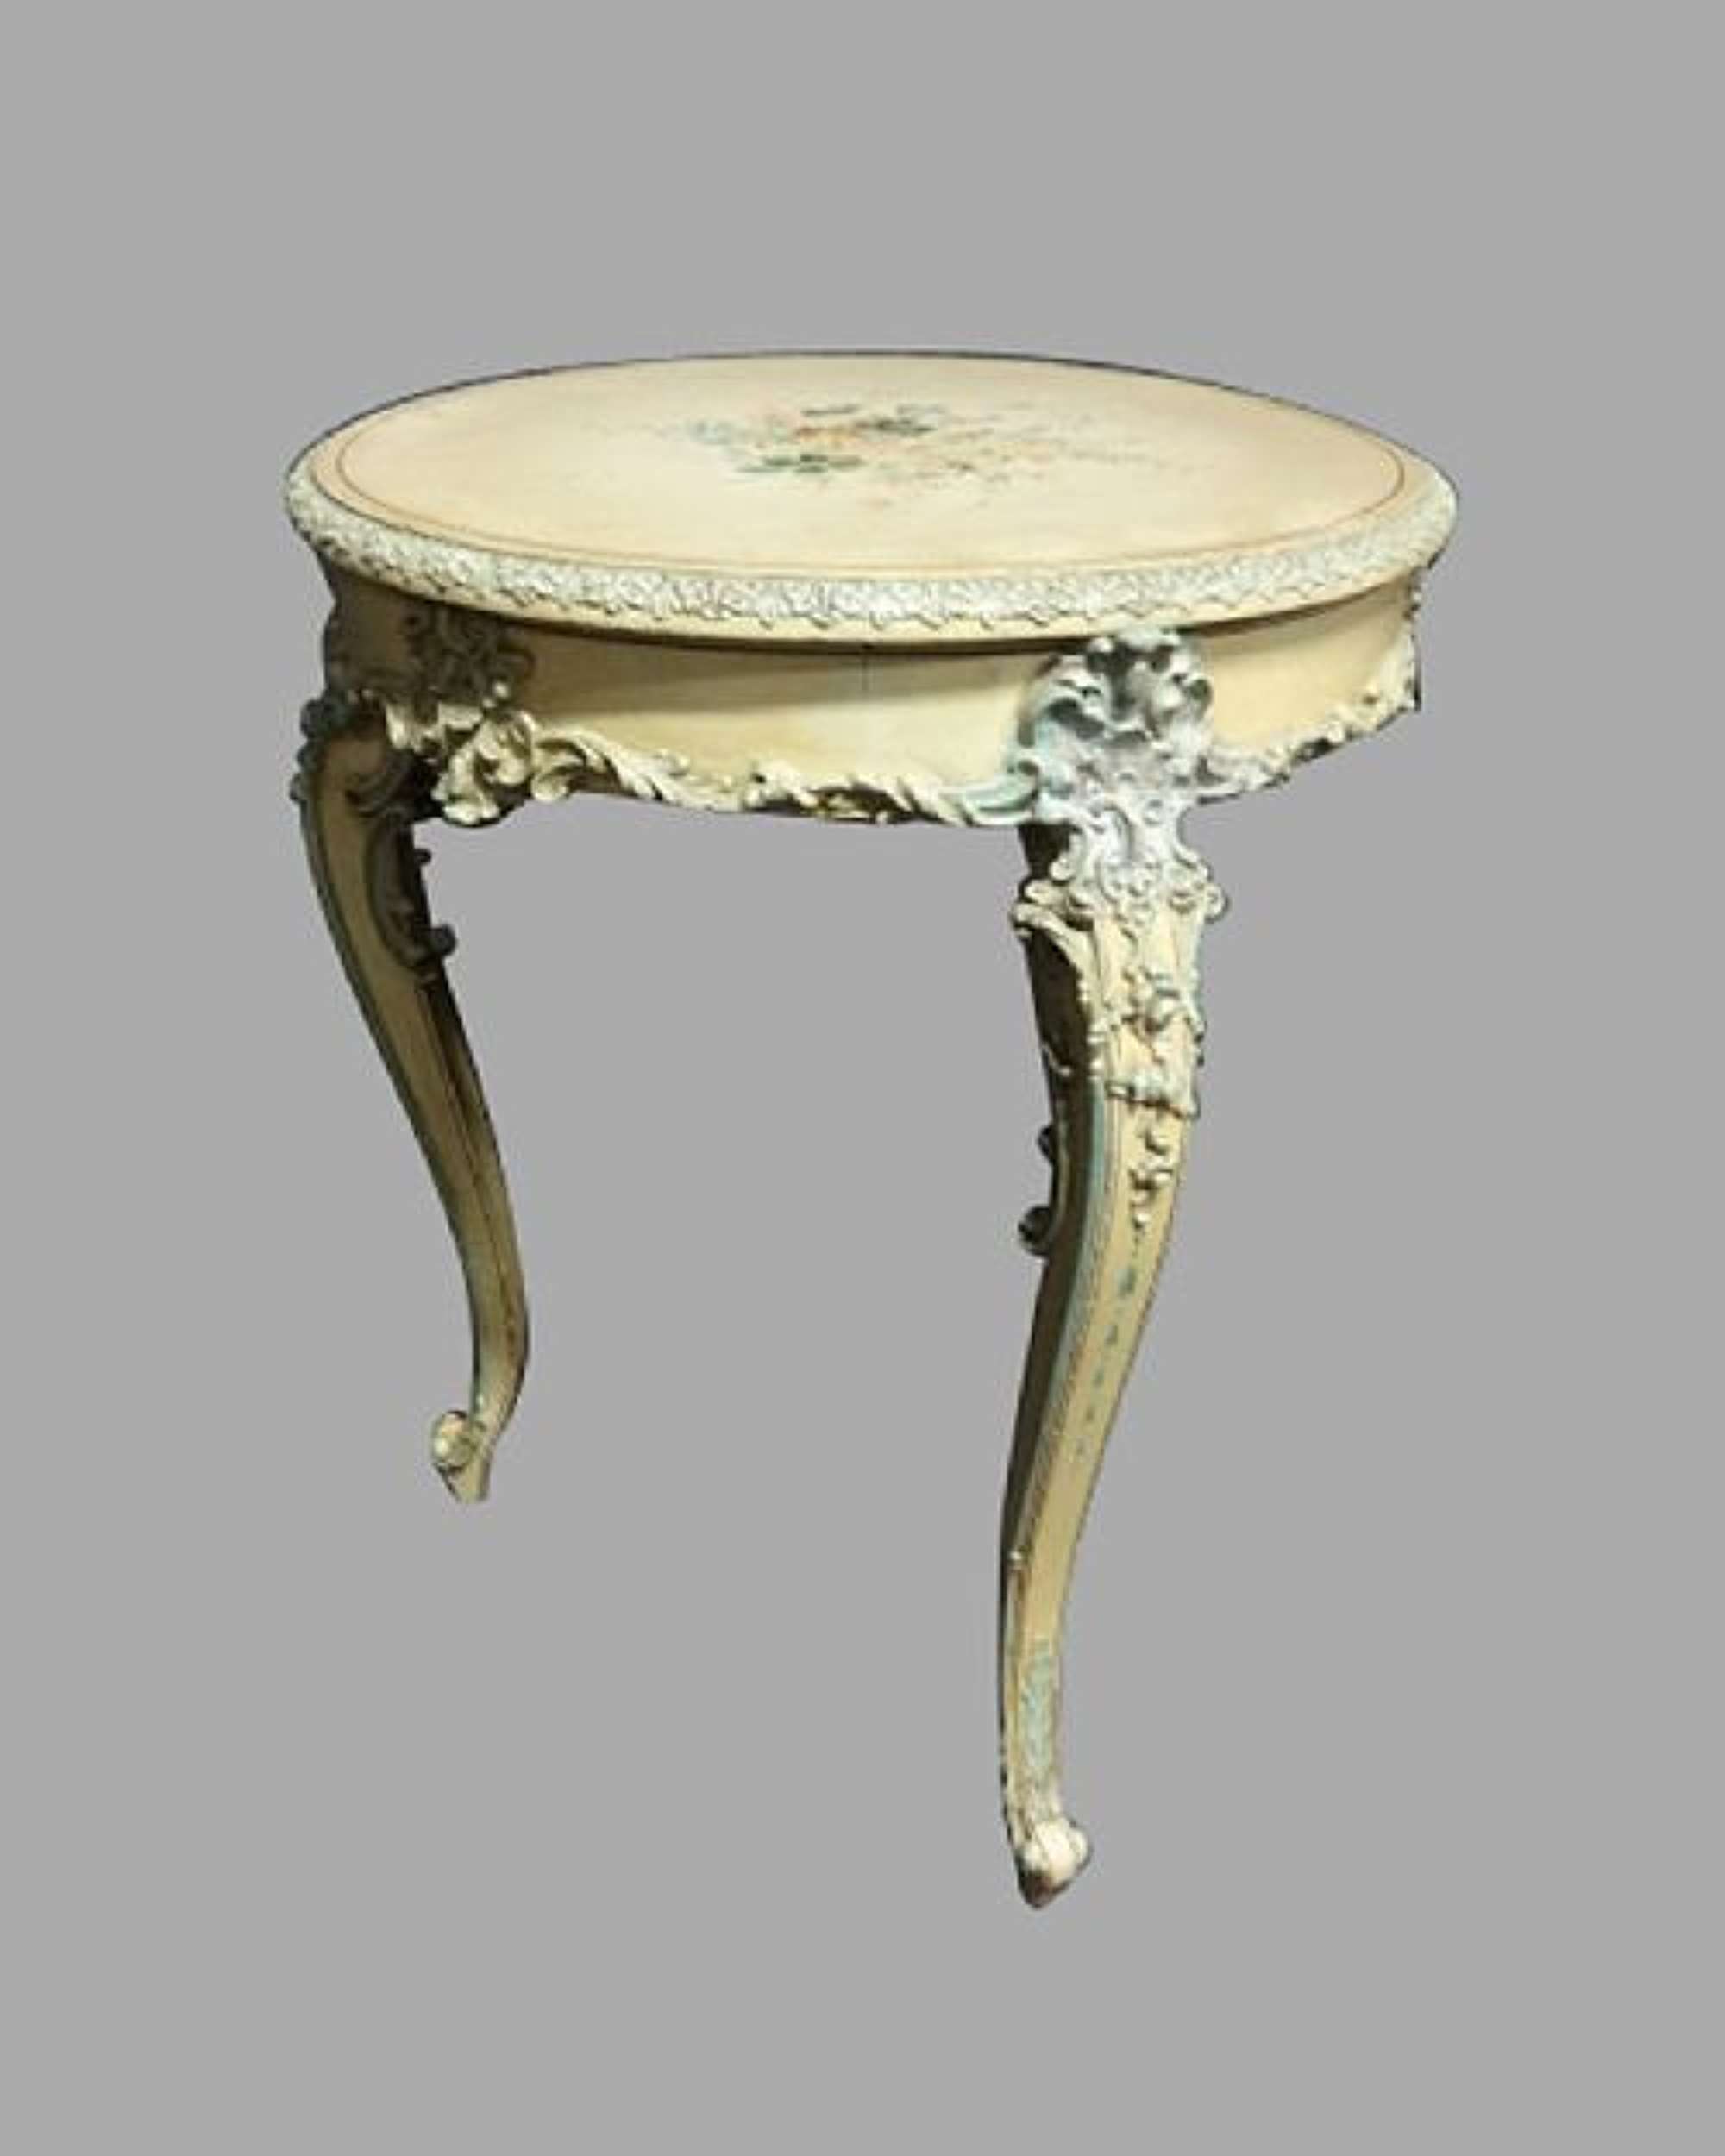 Very Good Original Painted Occasional Table